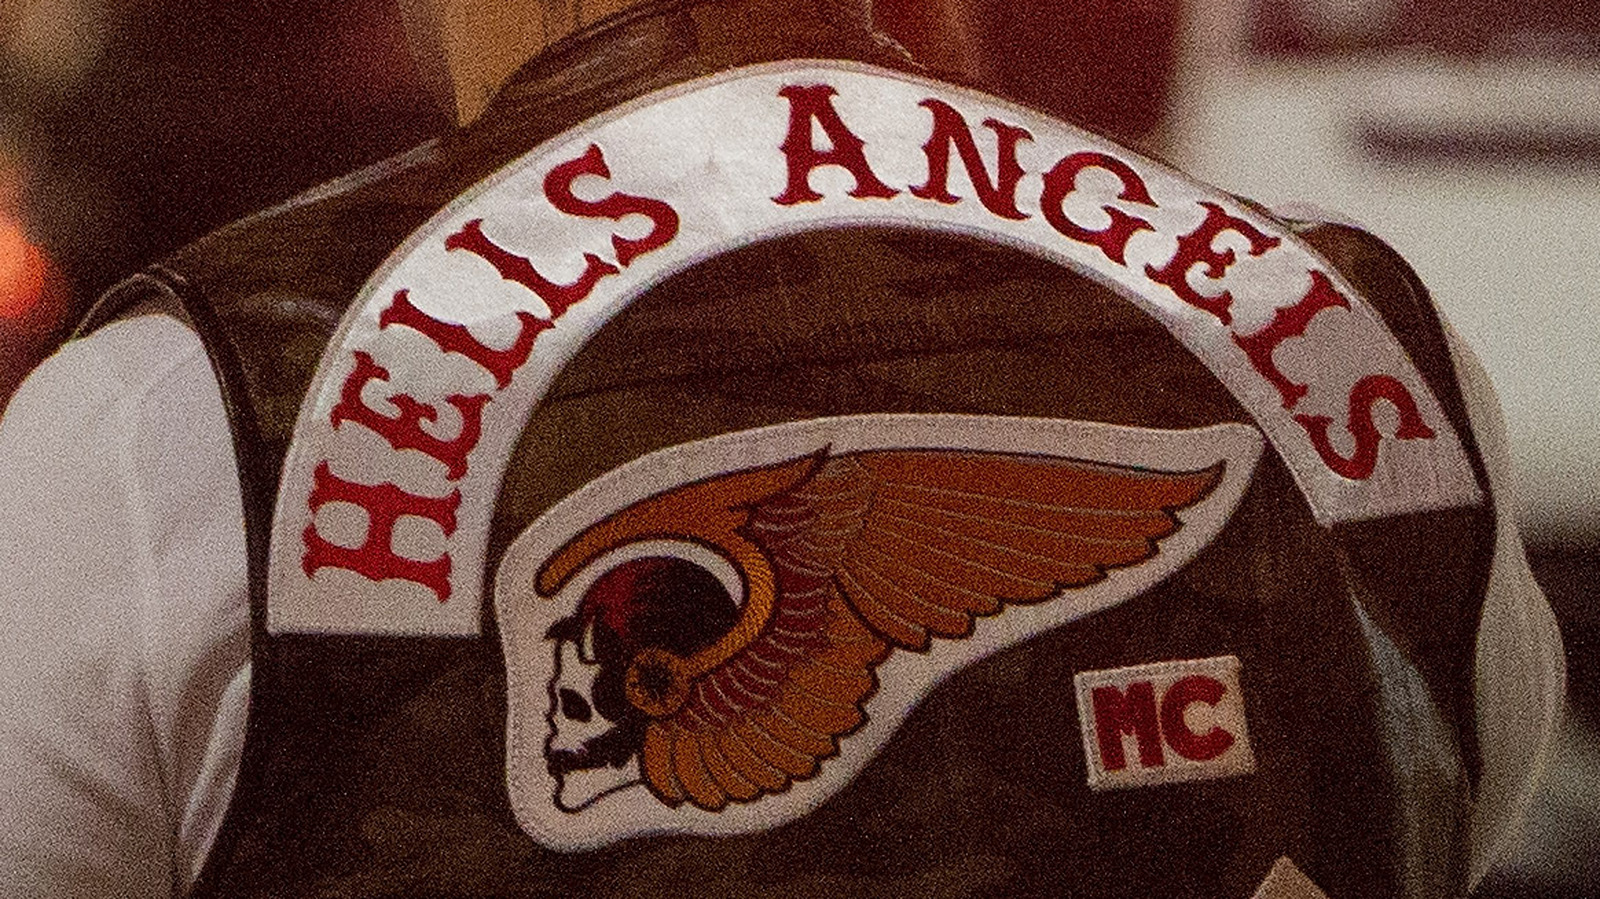 https://www.grunge.com/img/gallery/where-did-the-hells-angels-get-their-name/l-intro-1650404027.jpg